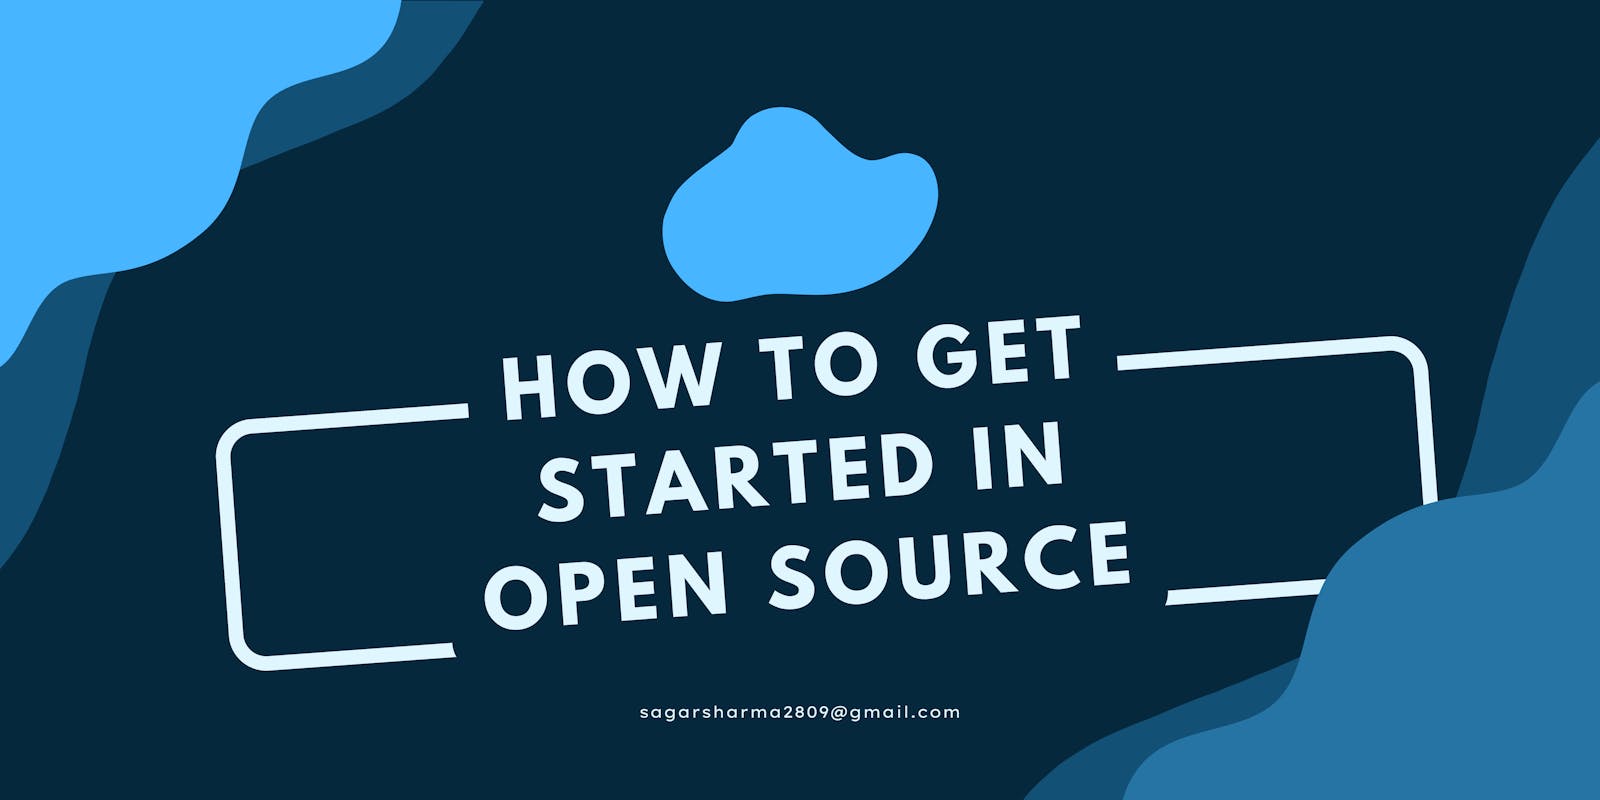 What is Open-Source? How to get Started